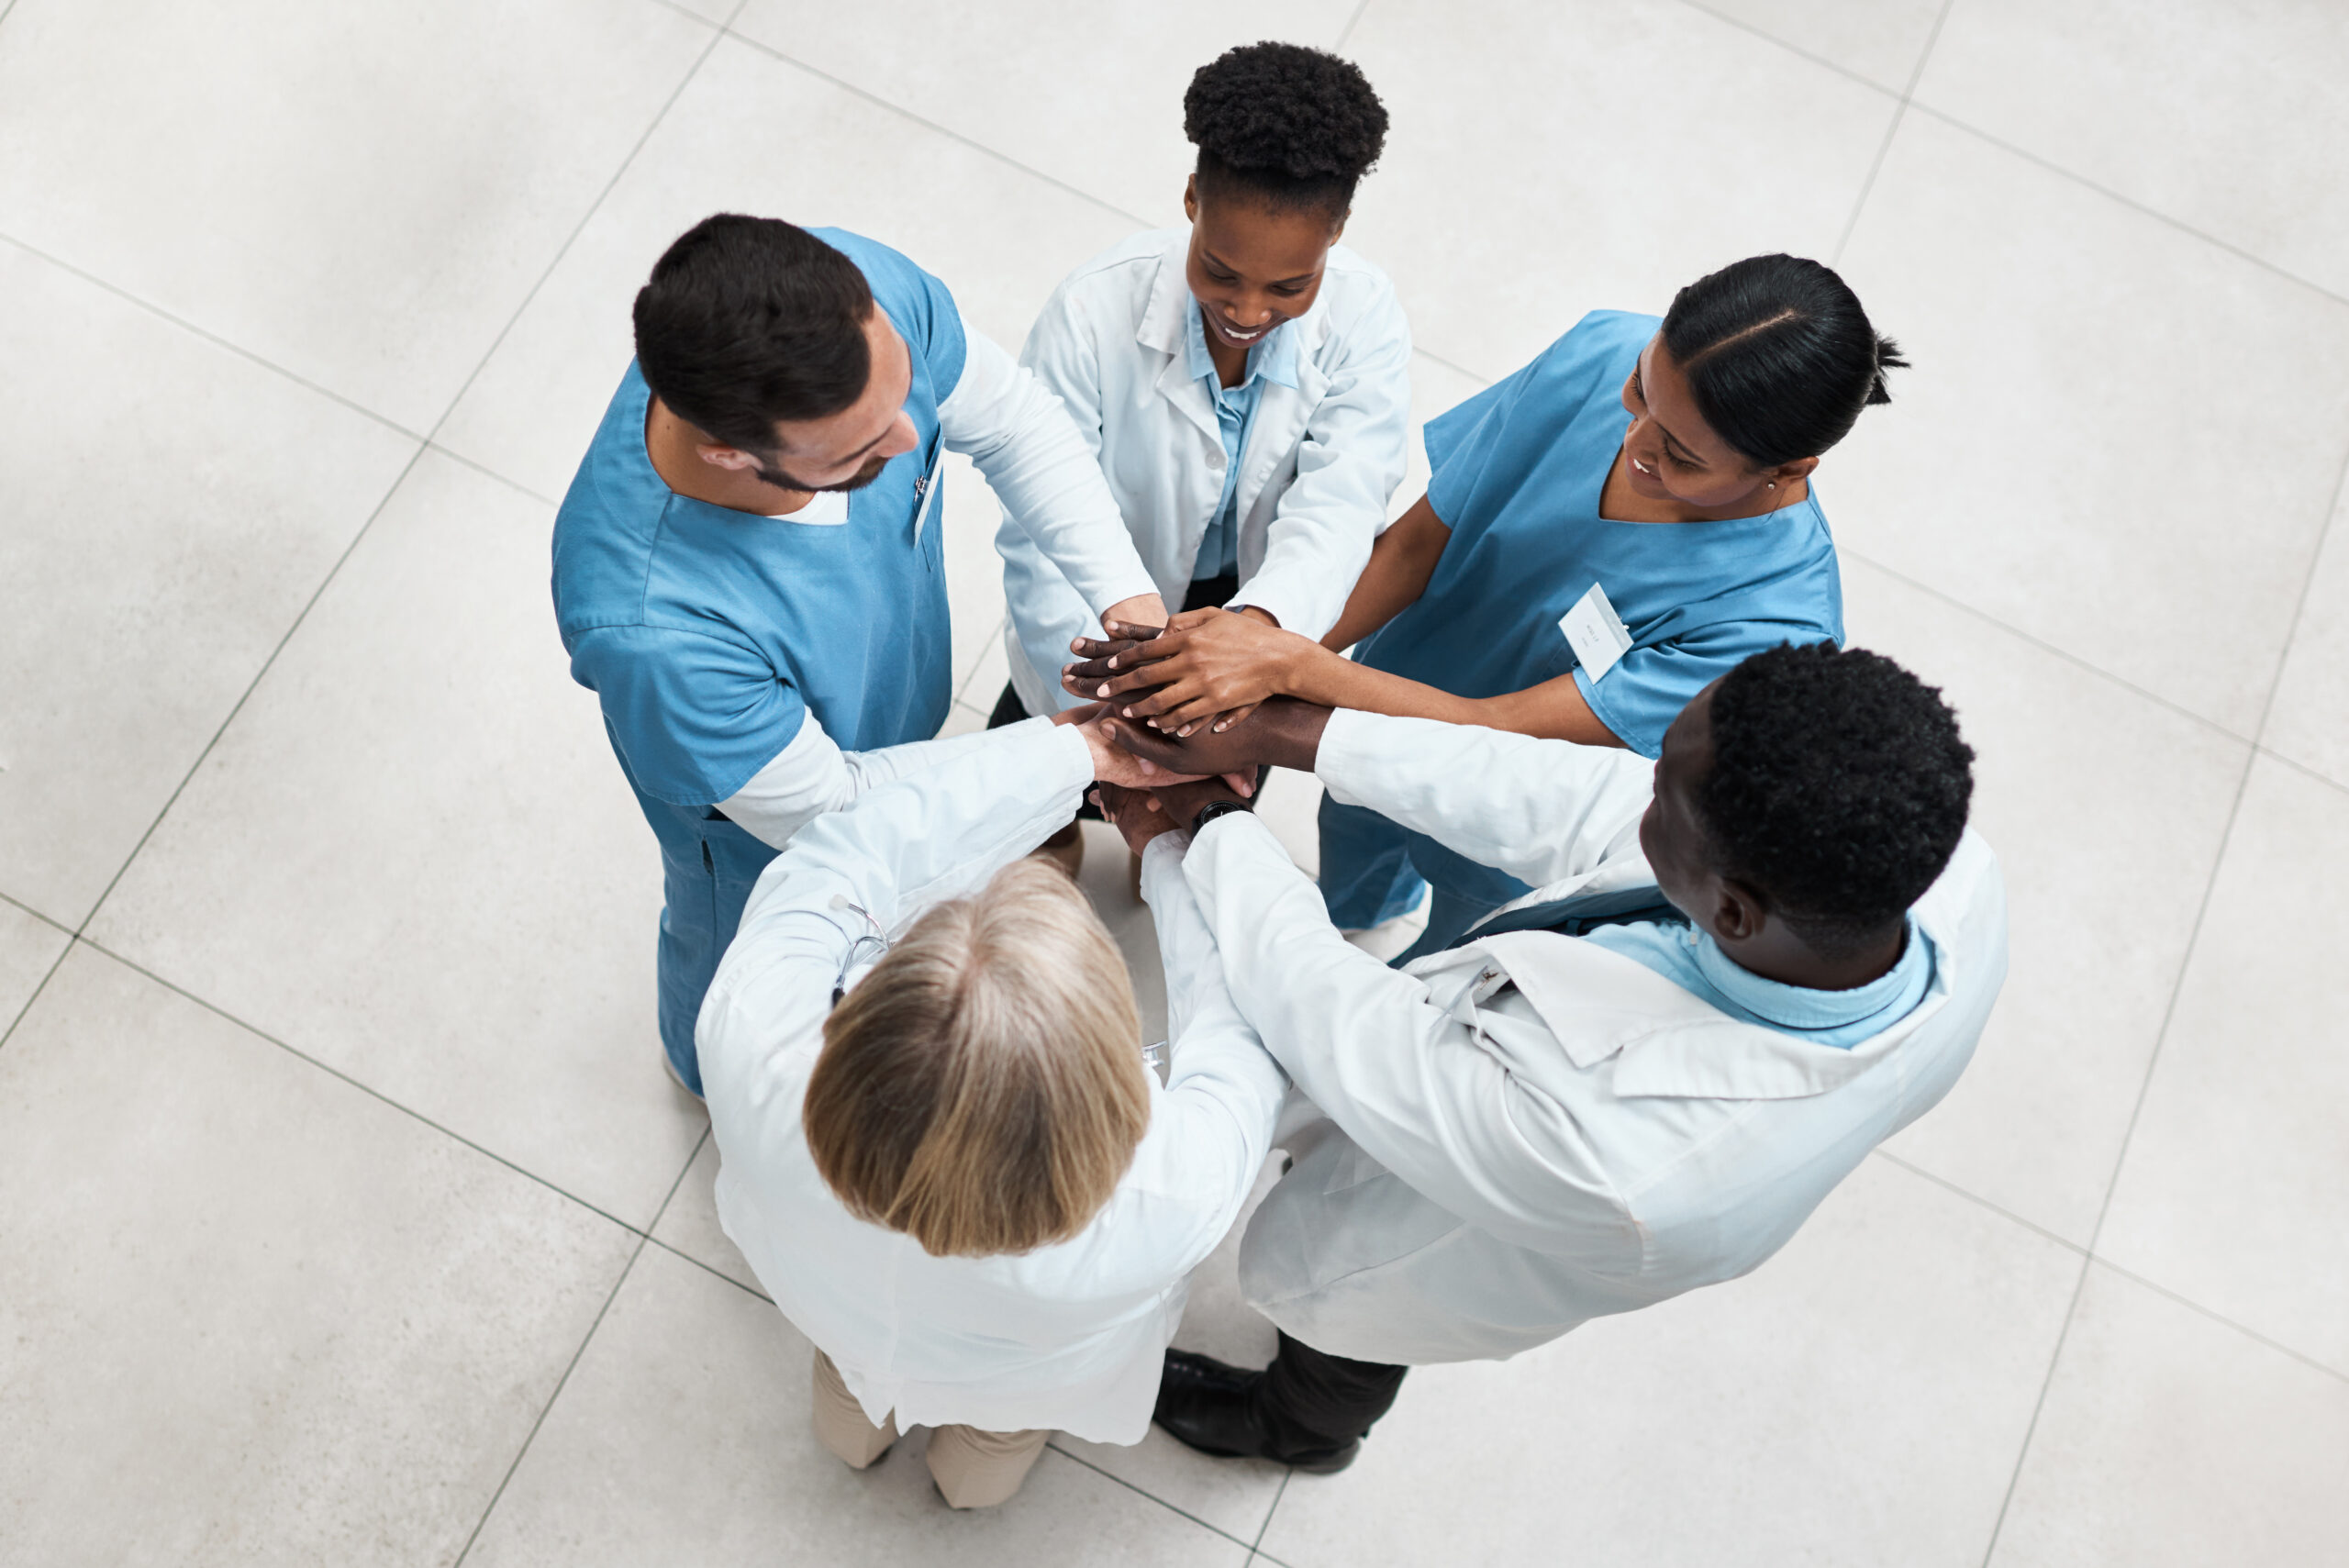 Recruiting Physicians for a Value-Based Care Model